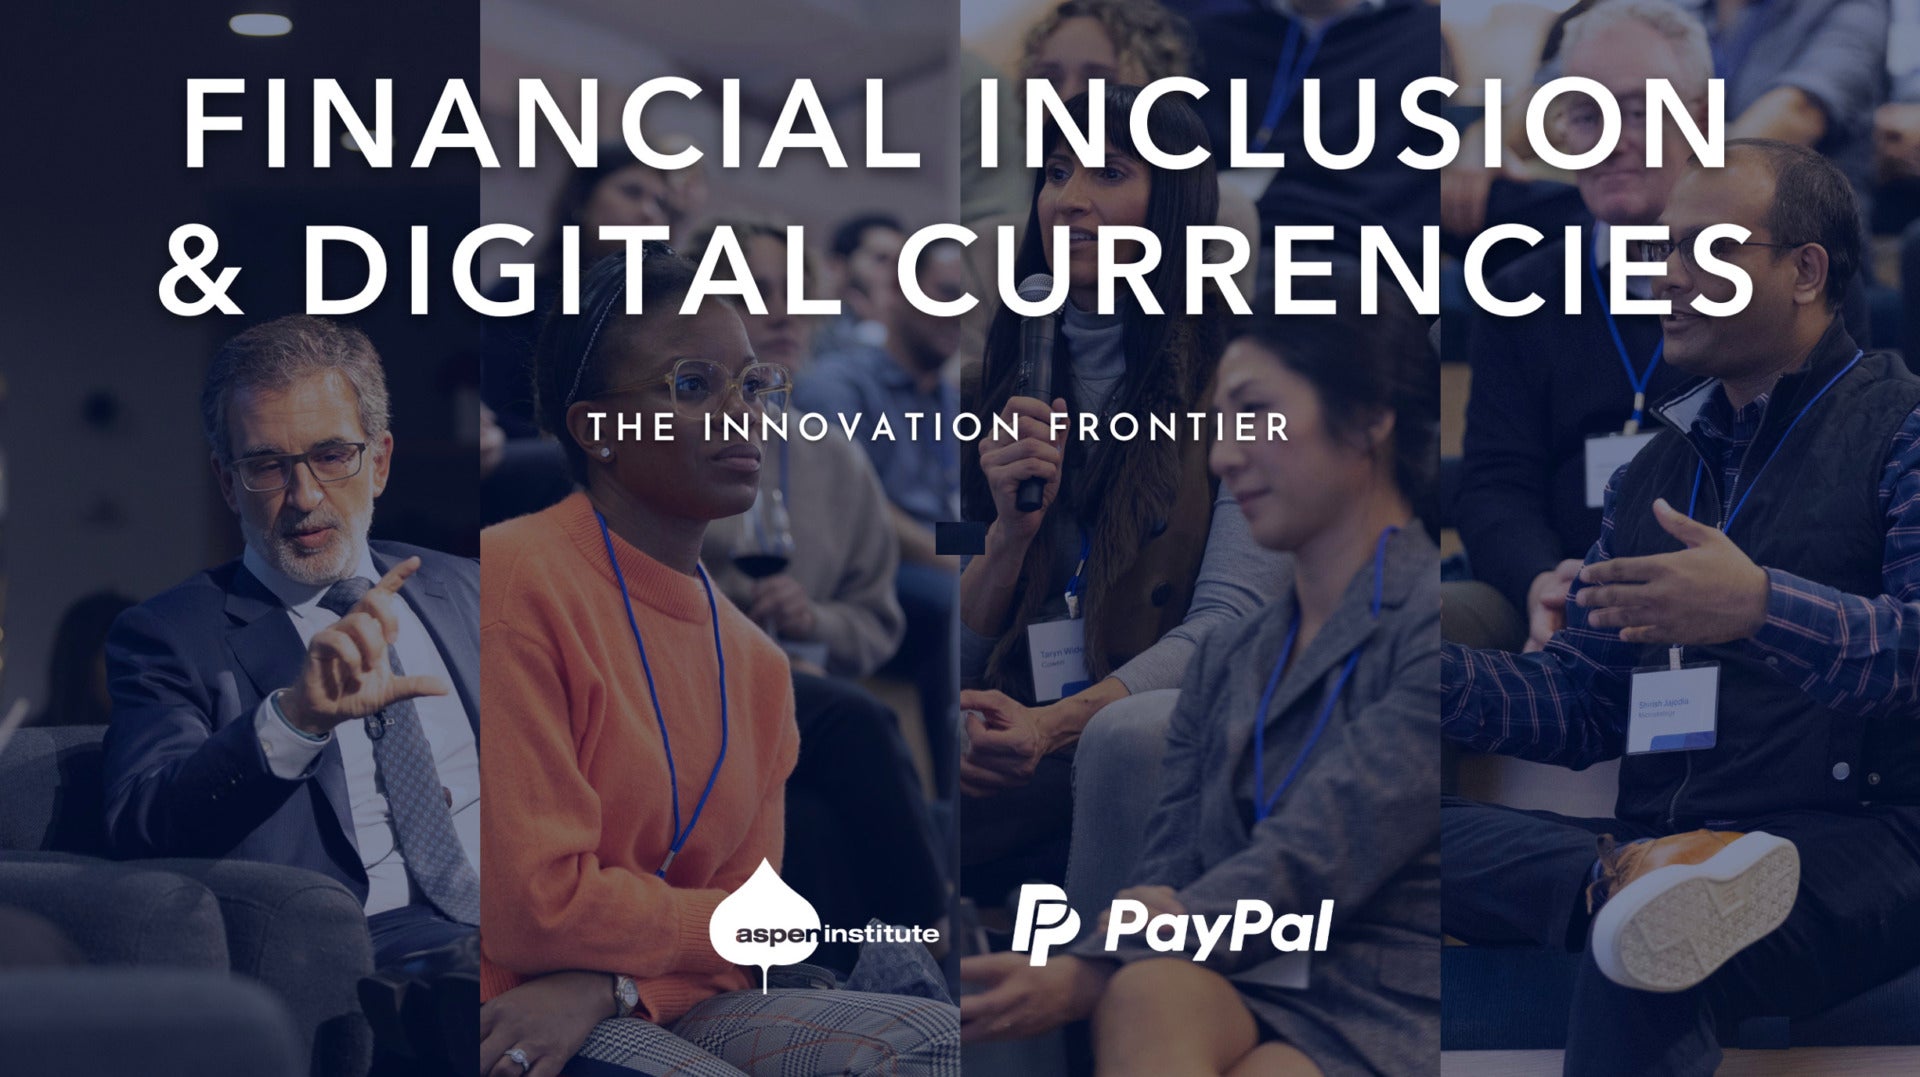 Digital Currencies as Drivers of Innovation and Inclusion